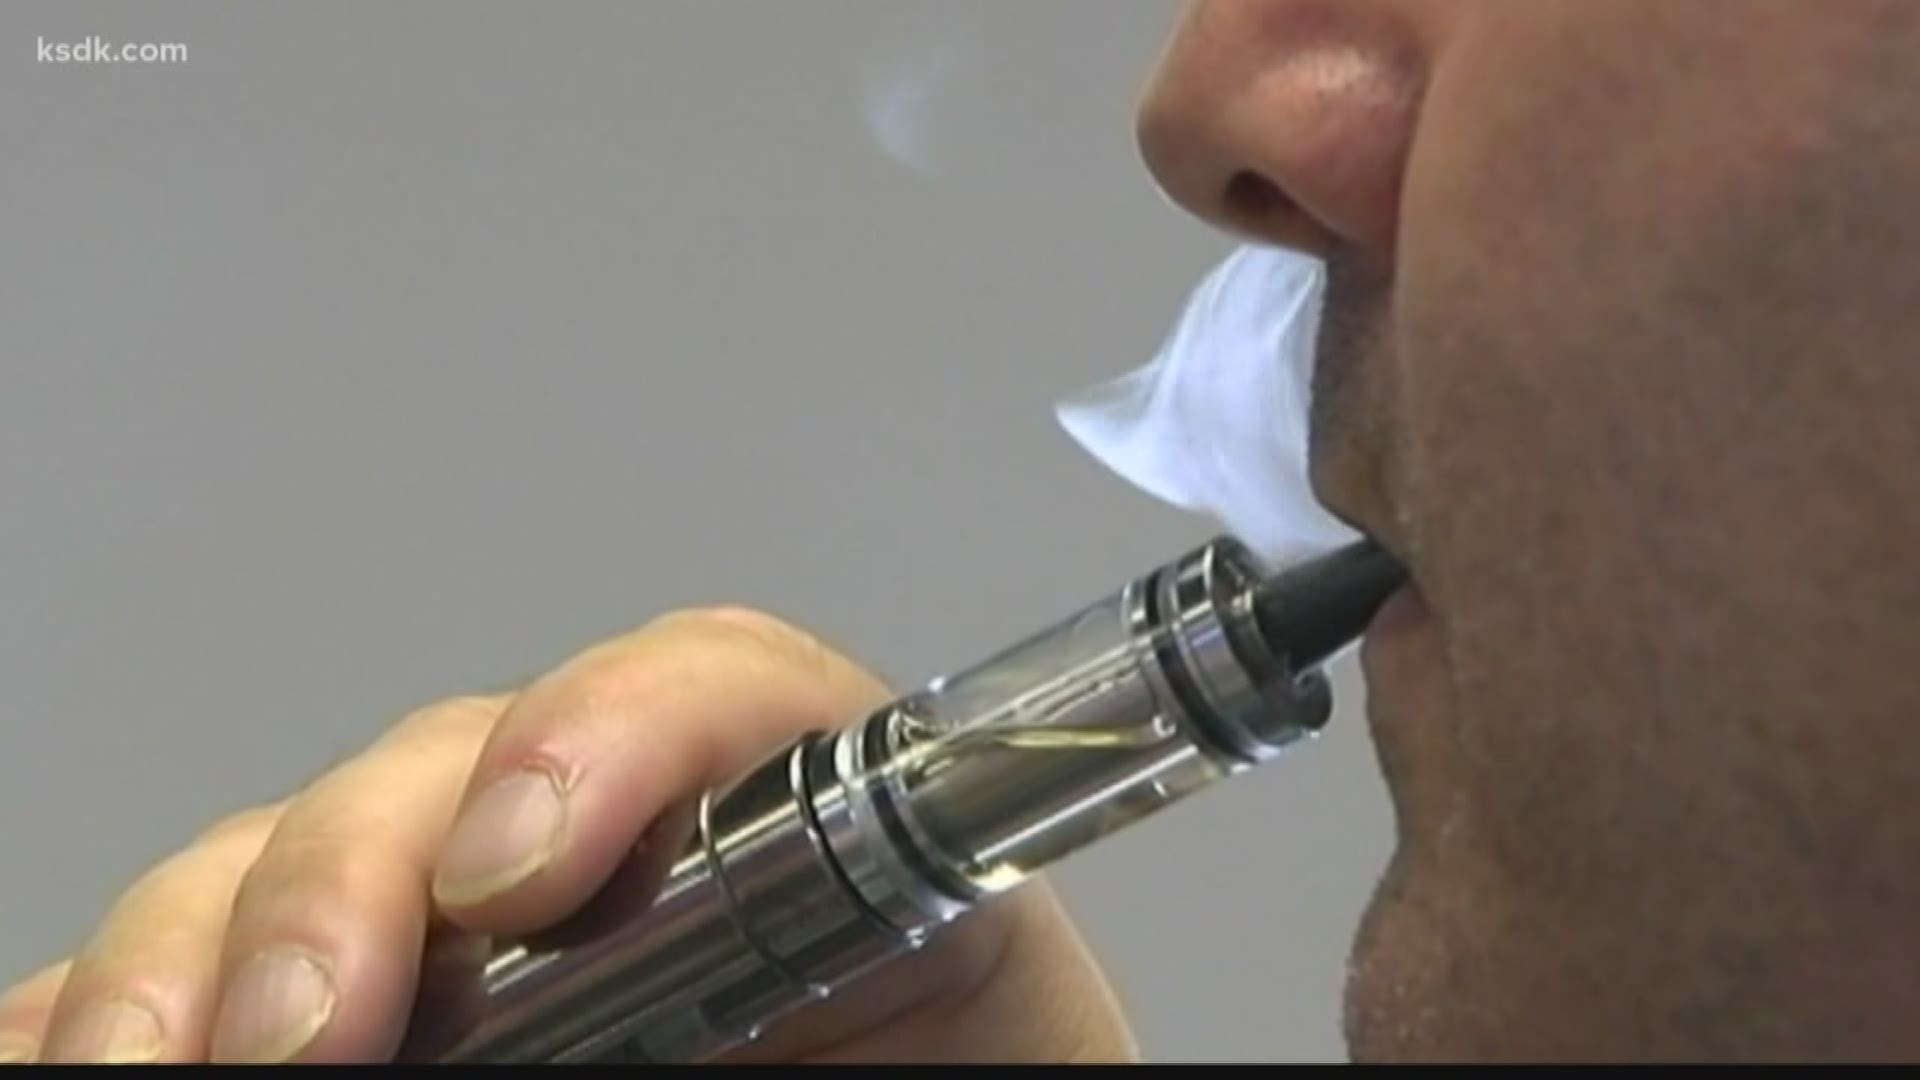 Here's what we know for sure about recent vaping-related sicknesses.